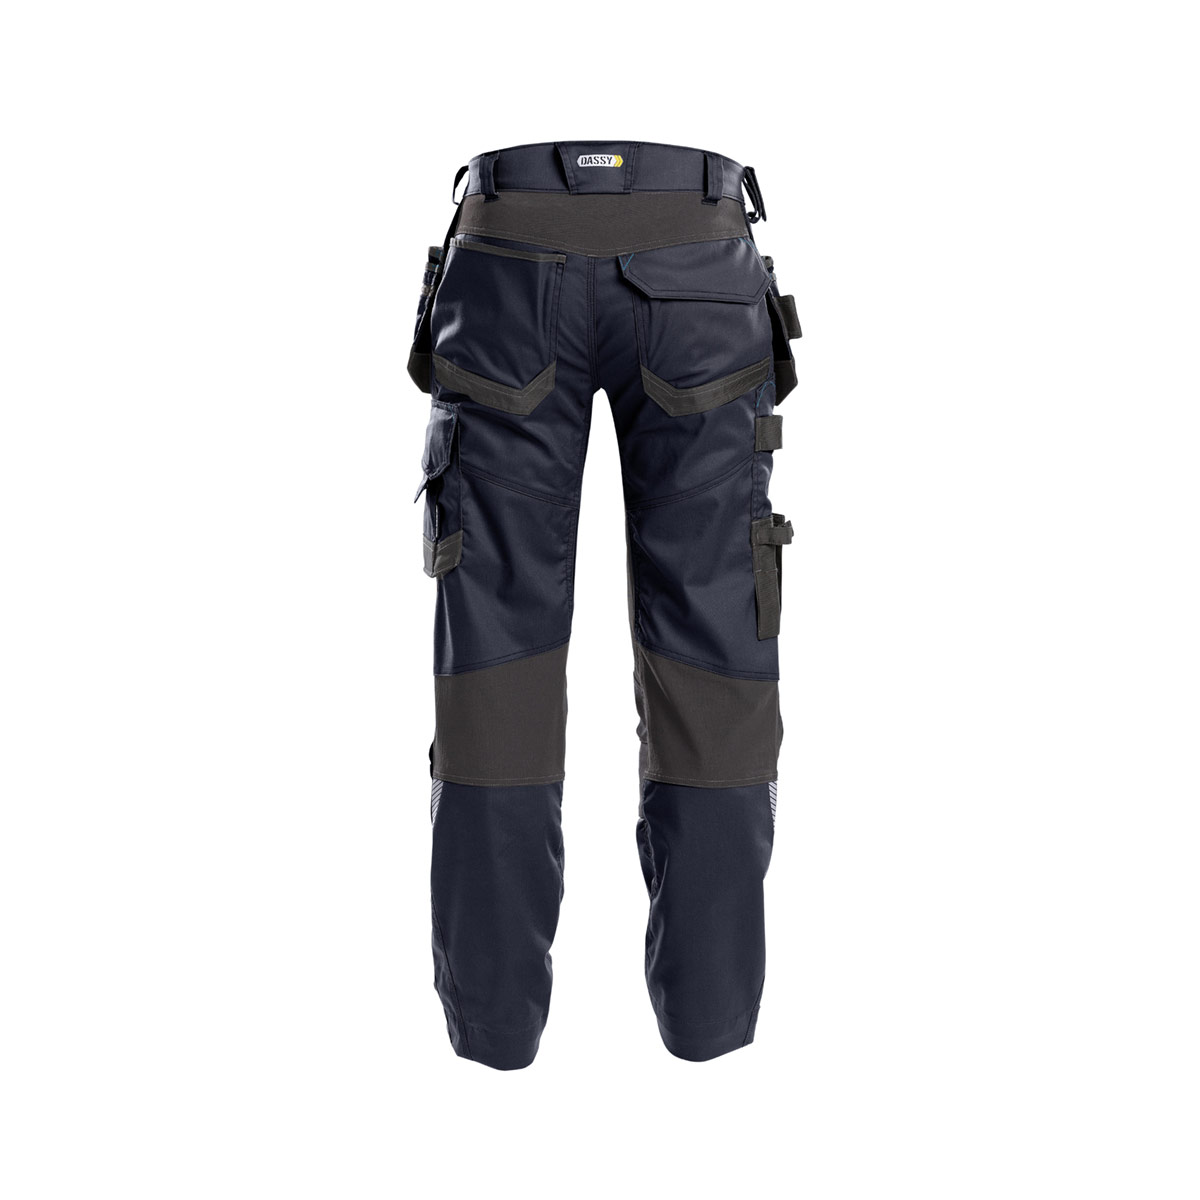 DASSY FLUX work pants with stretch, holster pockets and knee pad pockets